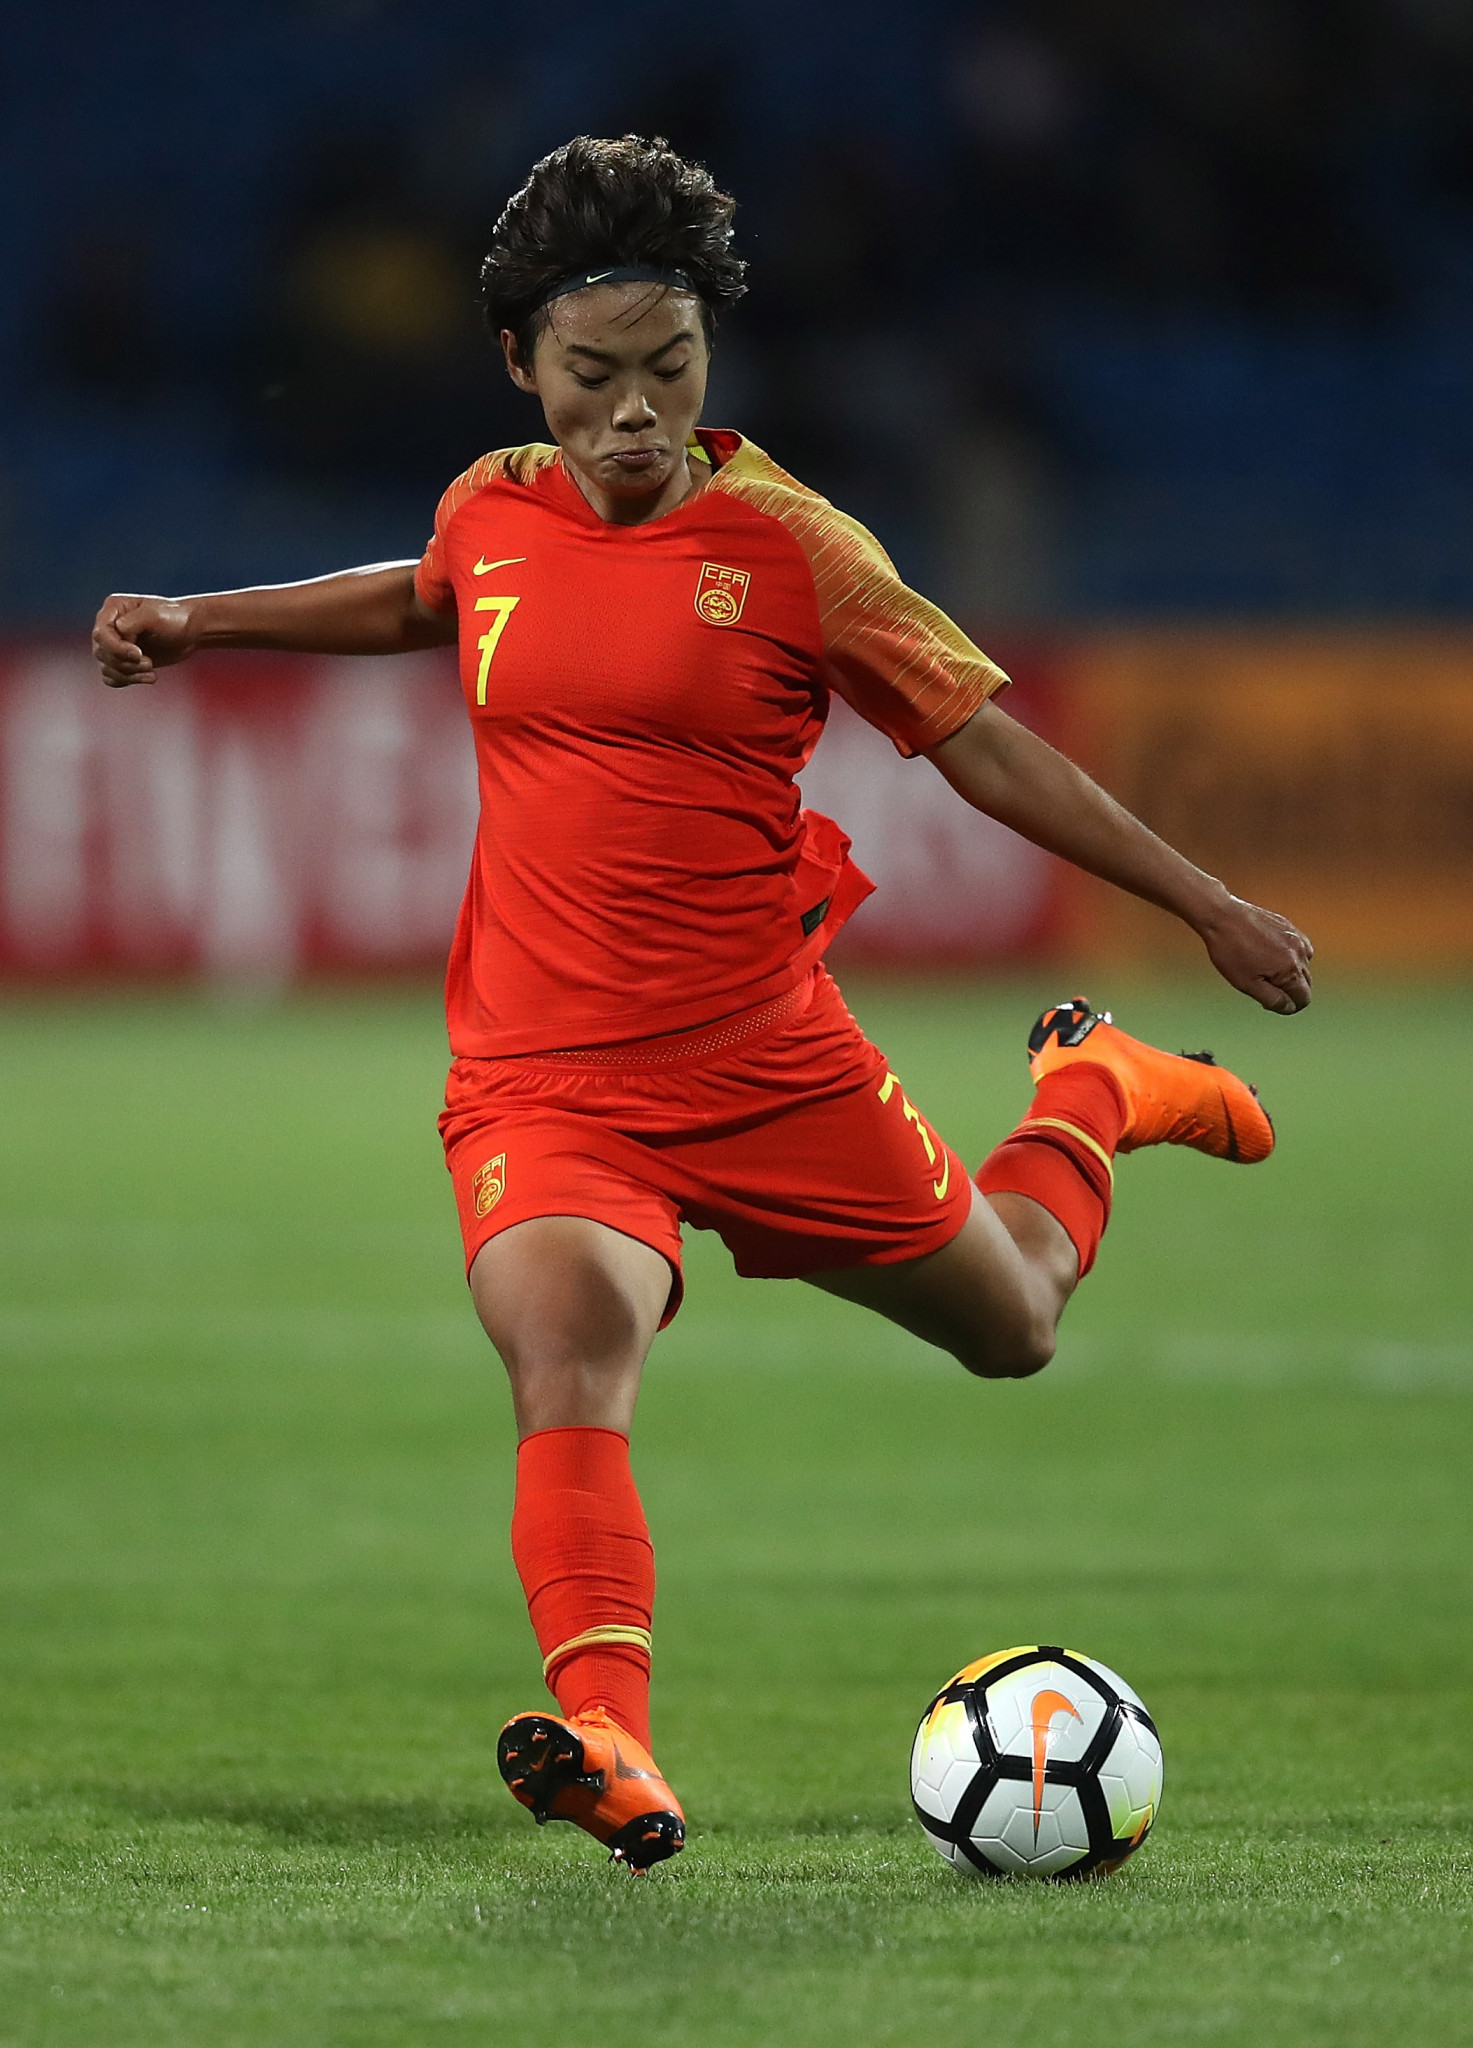 Wang Shuang scored three goals in China's 8-1 victory against Jordan ©Getty Images